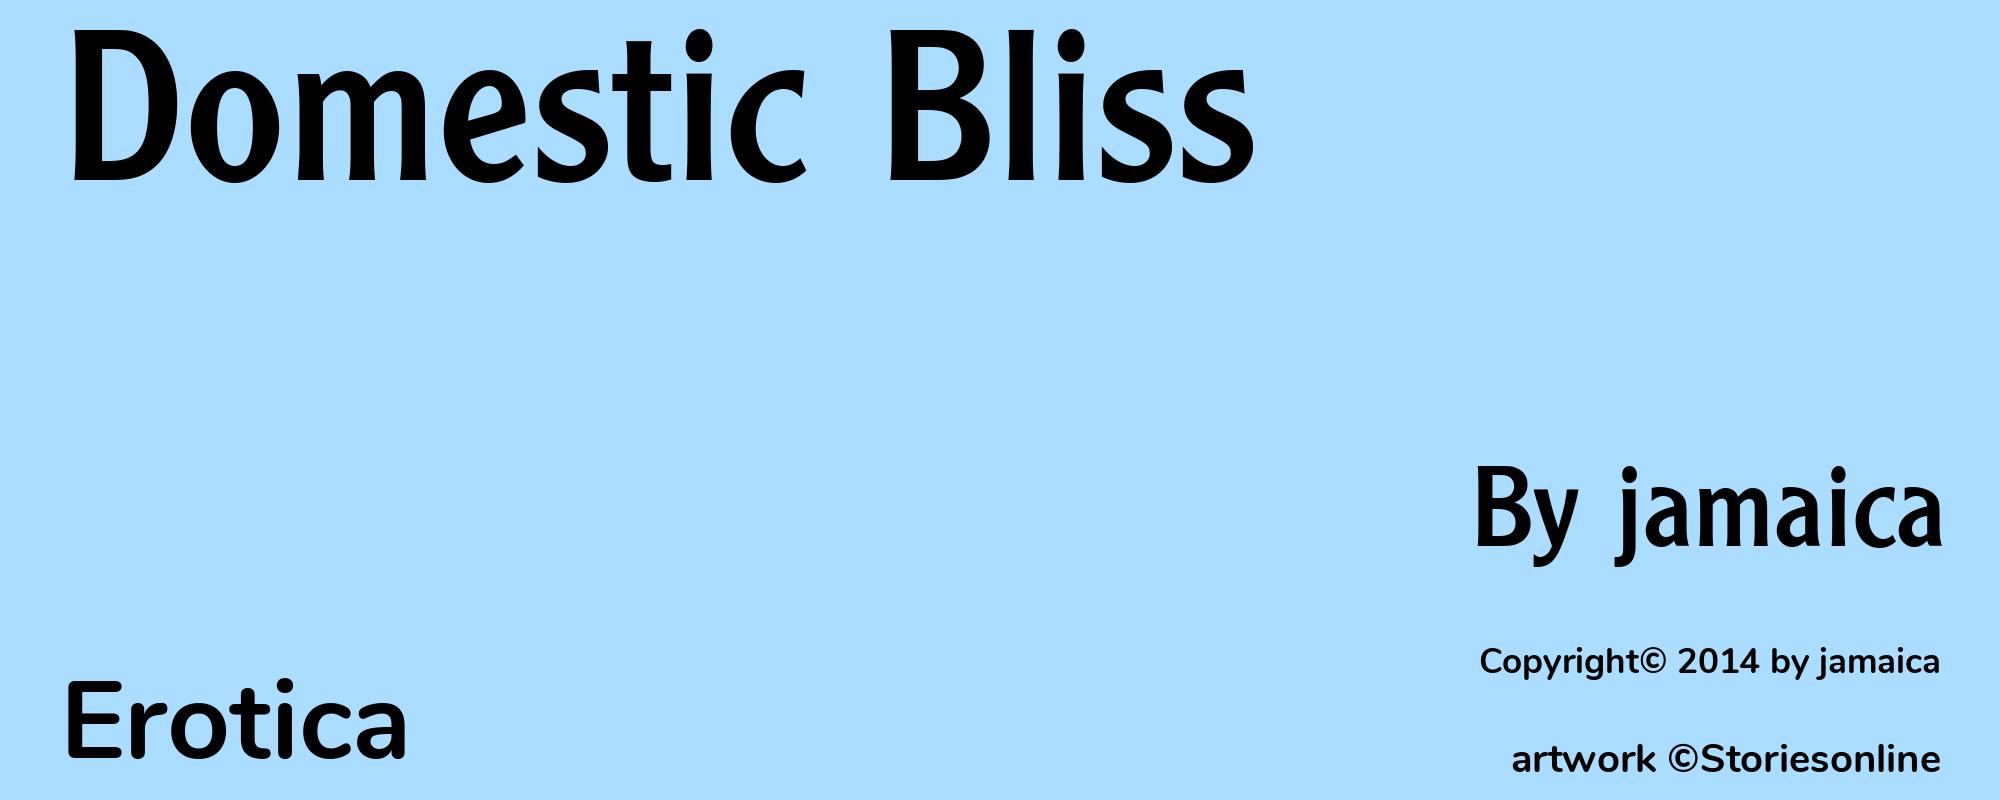 Domestic Bliss - Cover